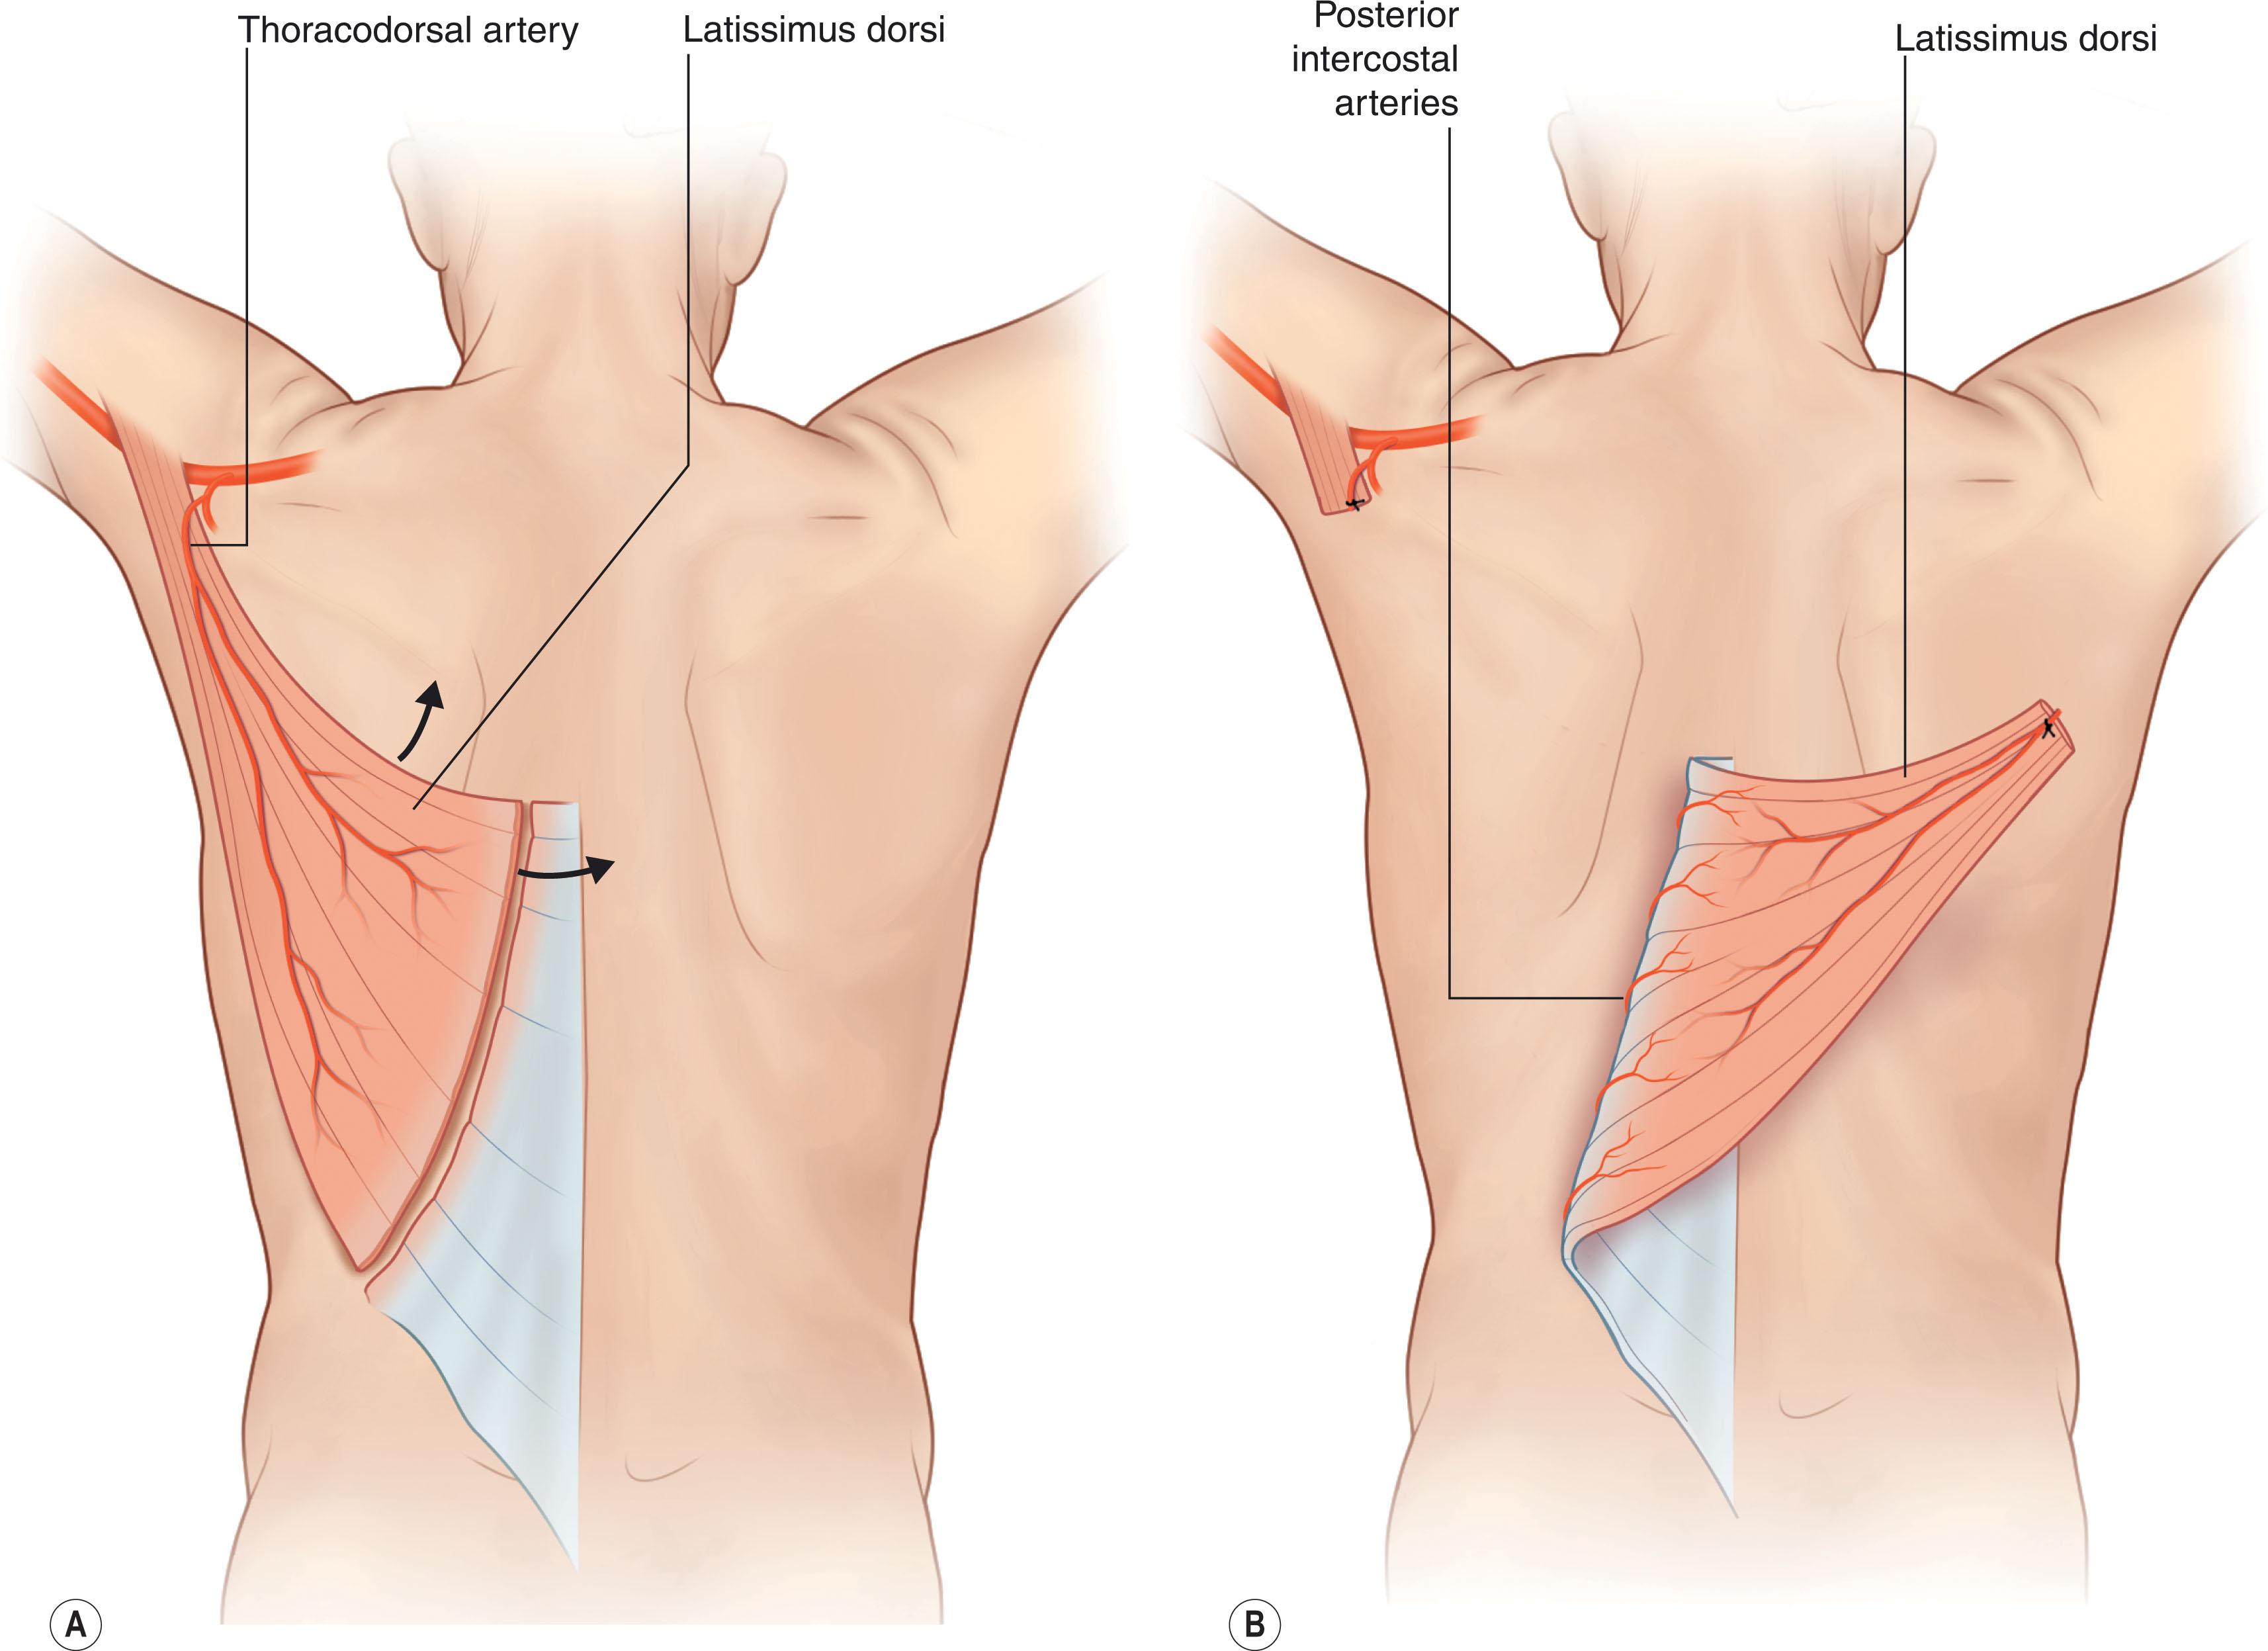 Figure 12.15, Latissimus dorsi flap variations. The latissimus dorsi flap is a versatile flap that can be based either on its primary or secondary (segmental) blood supply, allowing for great flexibility in flap design. (A) Is a traditional latissimus dorsi flap based off the thoracodorsal artery, this can be used as a locoregional flap or a free flap. (B) Demonstrates a turnover latissimus dorsi muscle flap based off the posterior intercostal arteries.